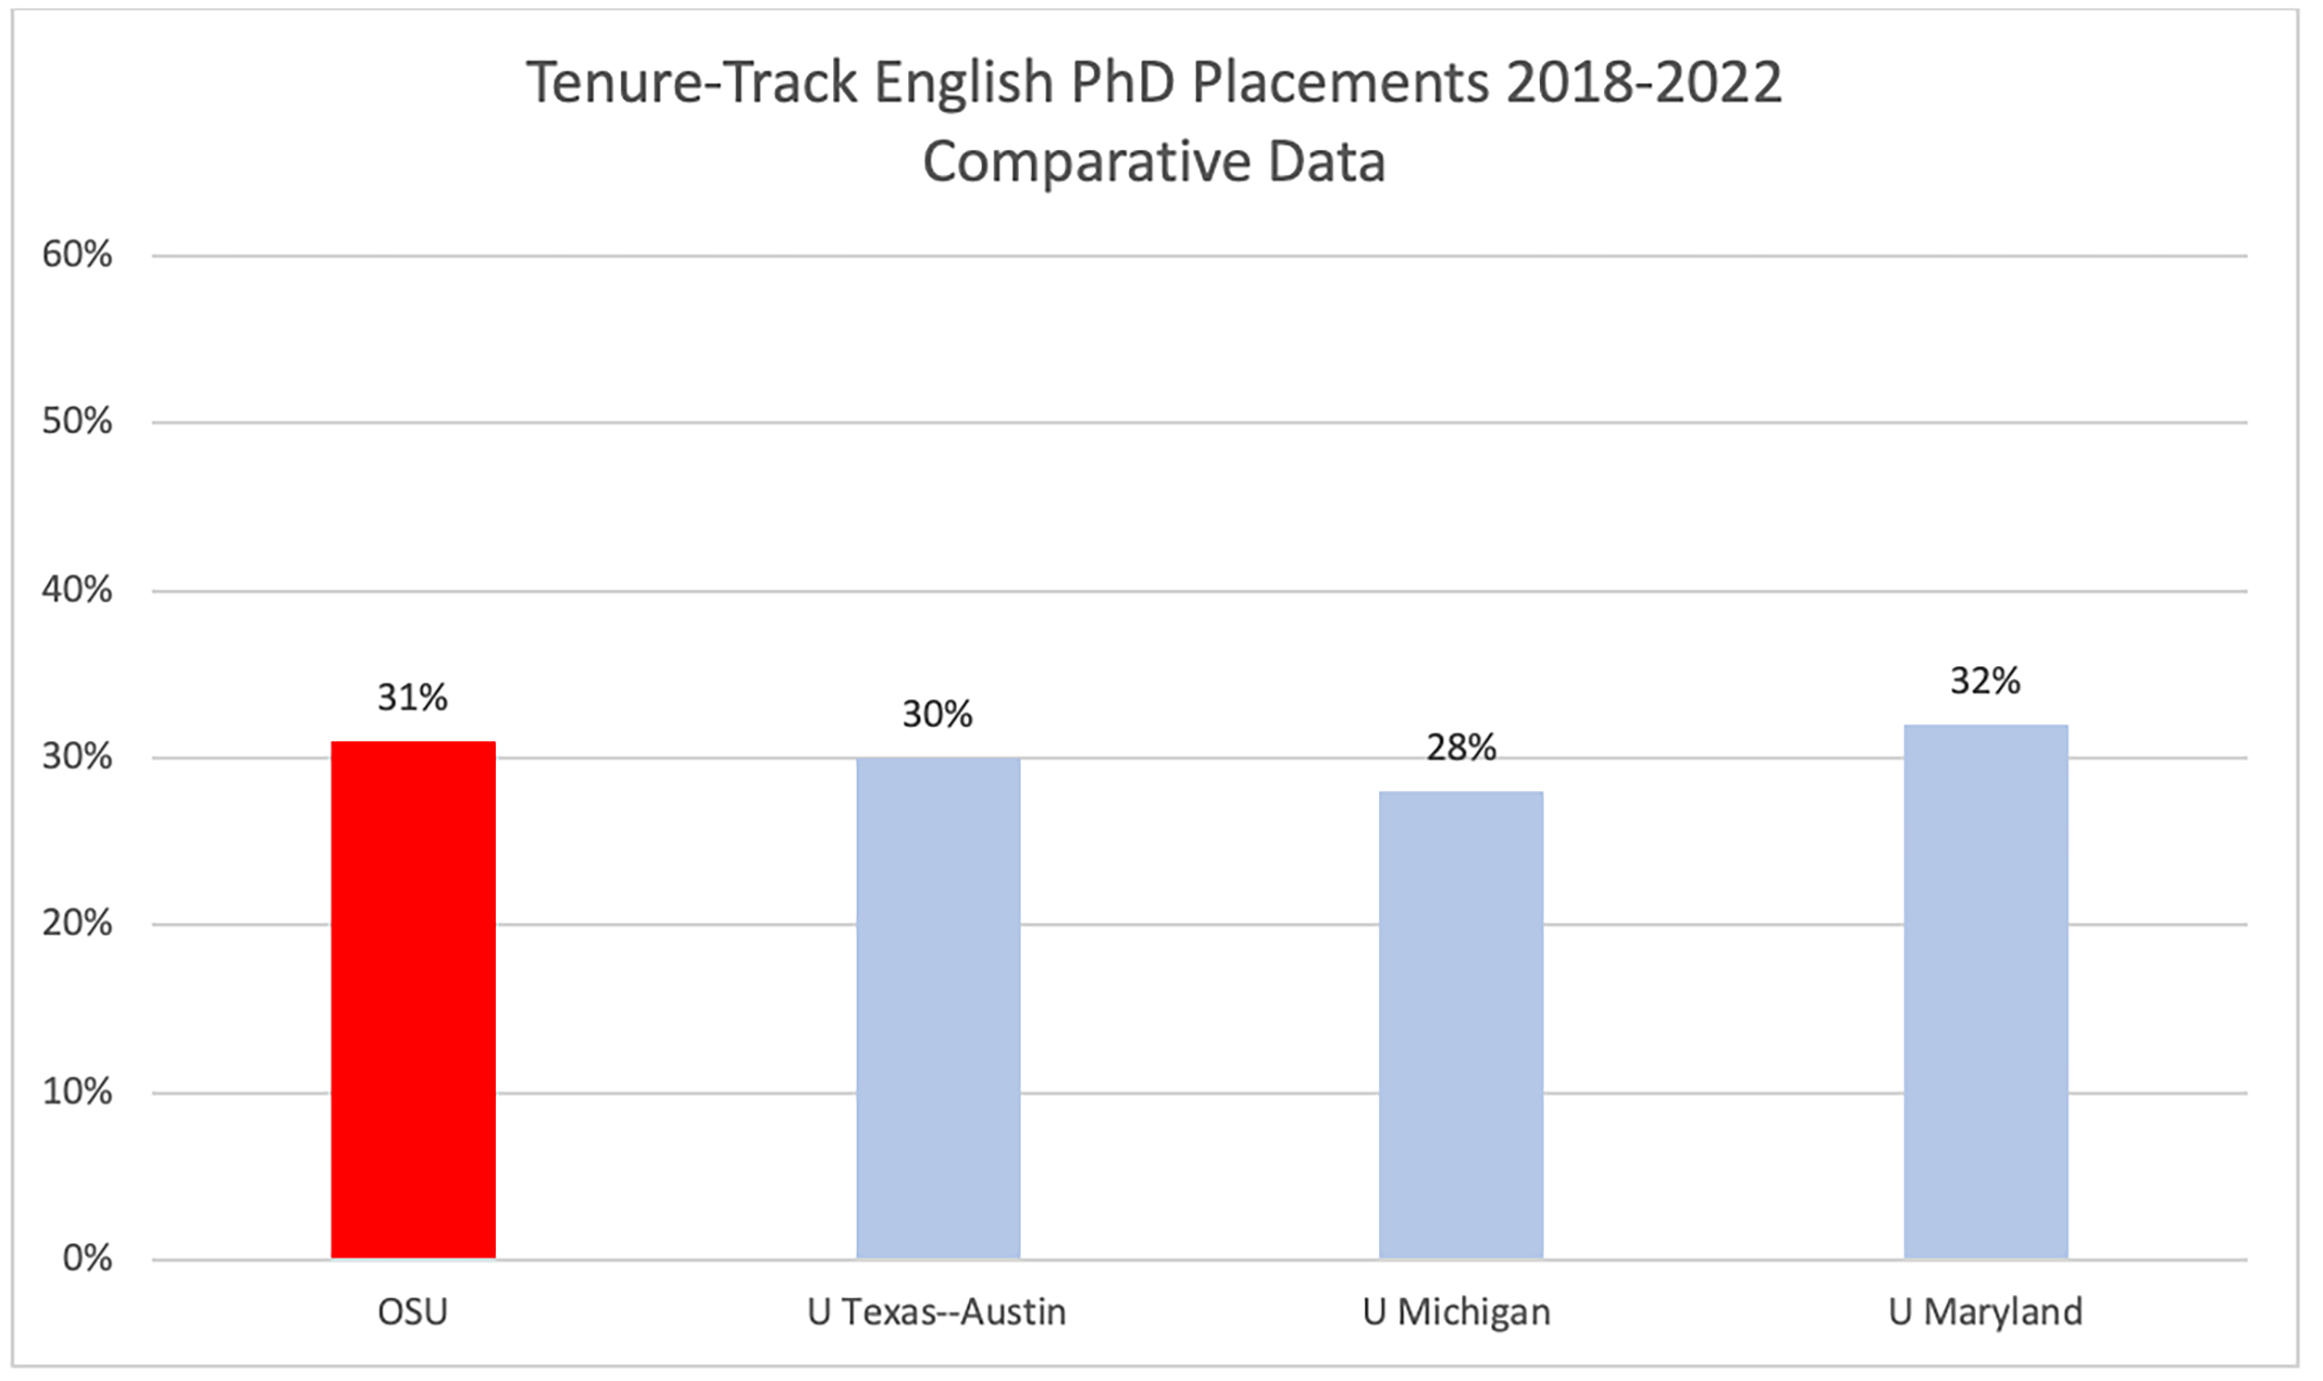 Chart comparing Ohio State PhD placement rate to comparable institutions, as described in text